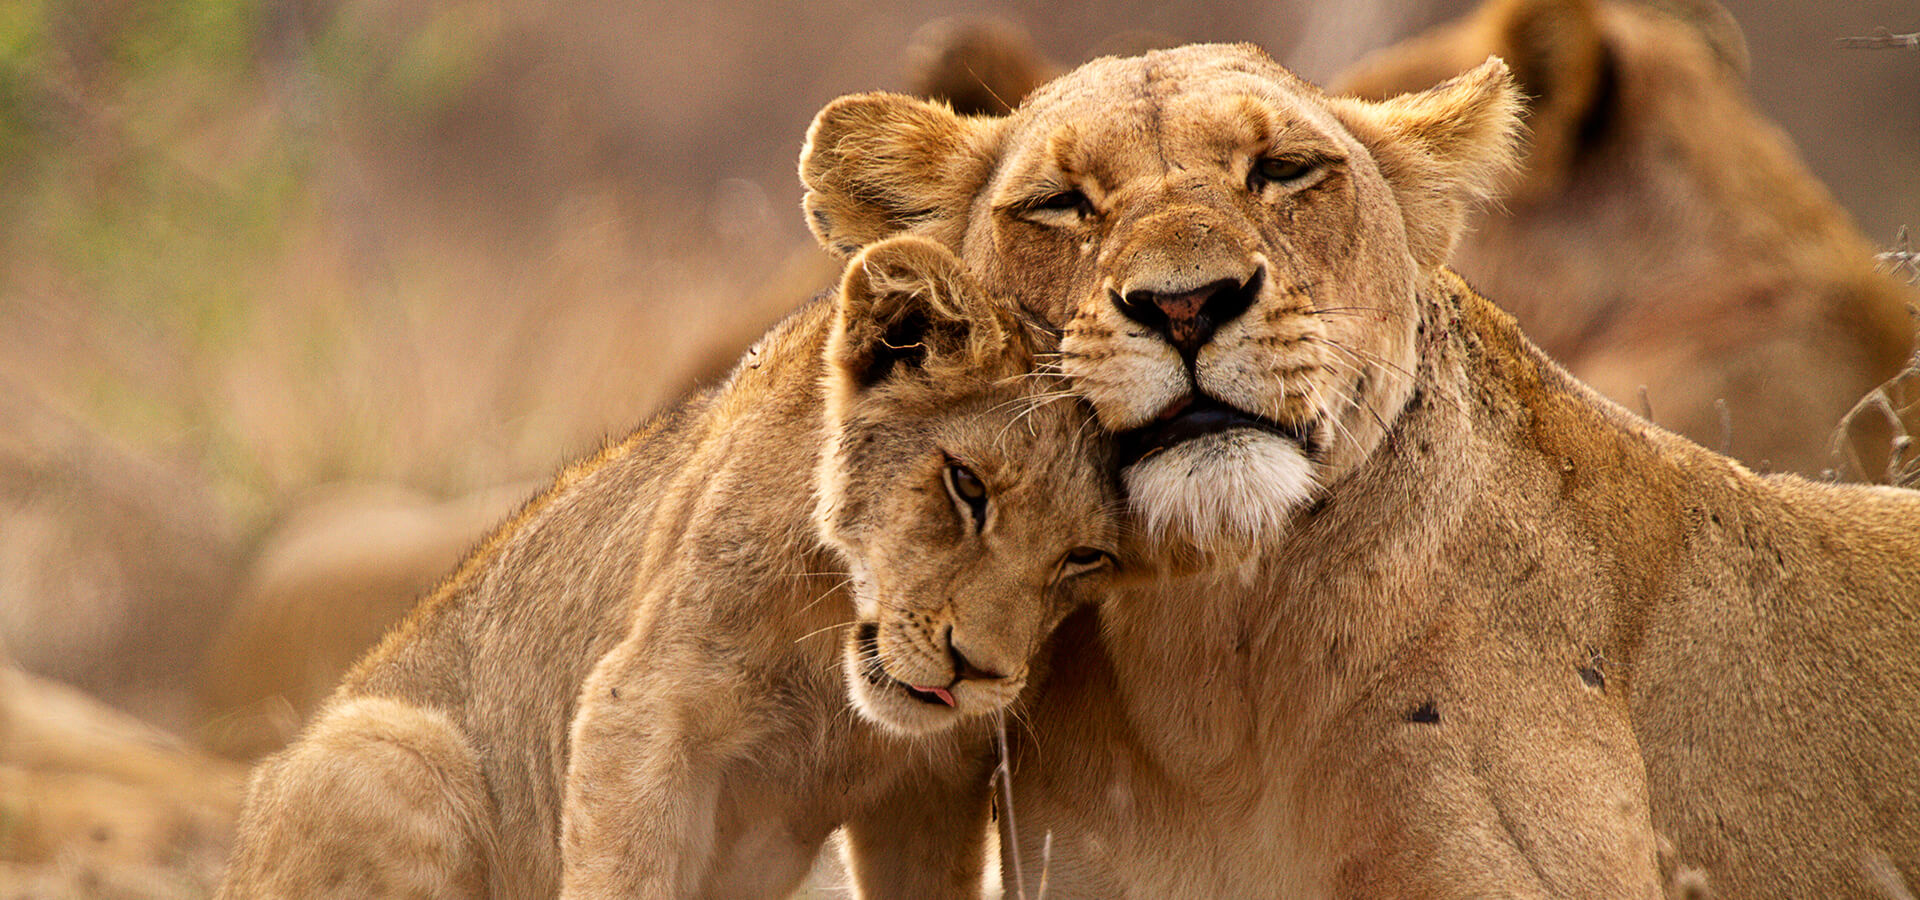 Lion cub and its mother cuddling